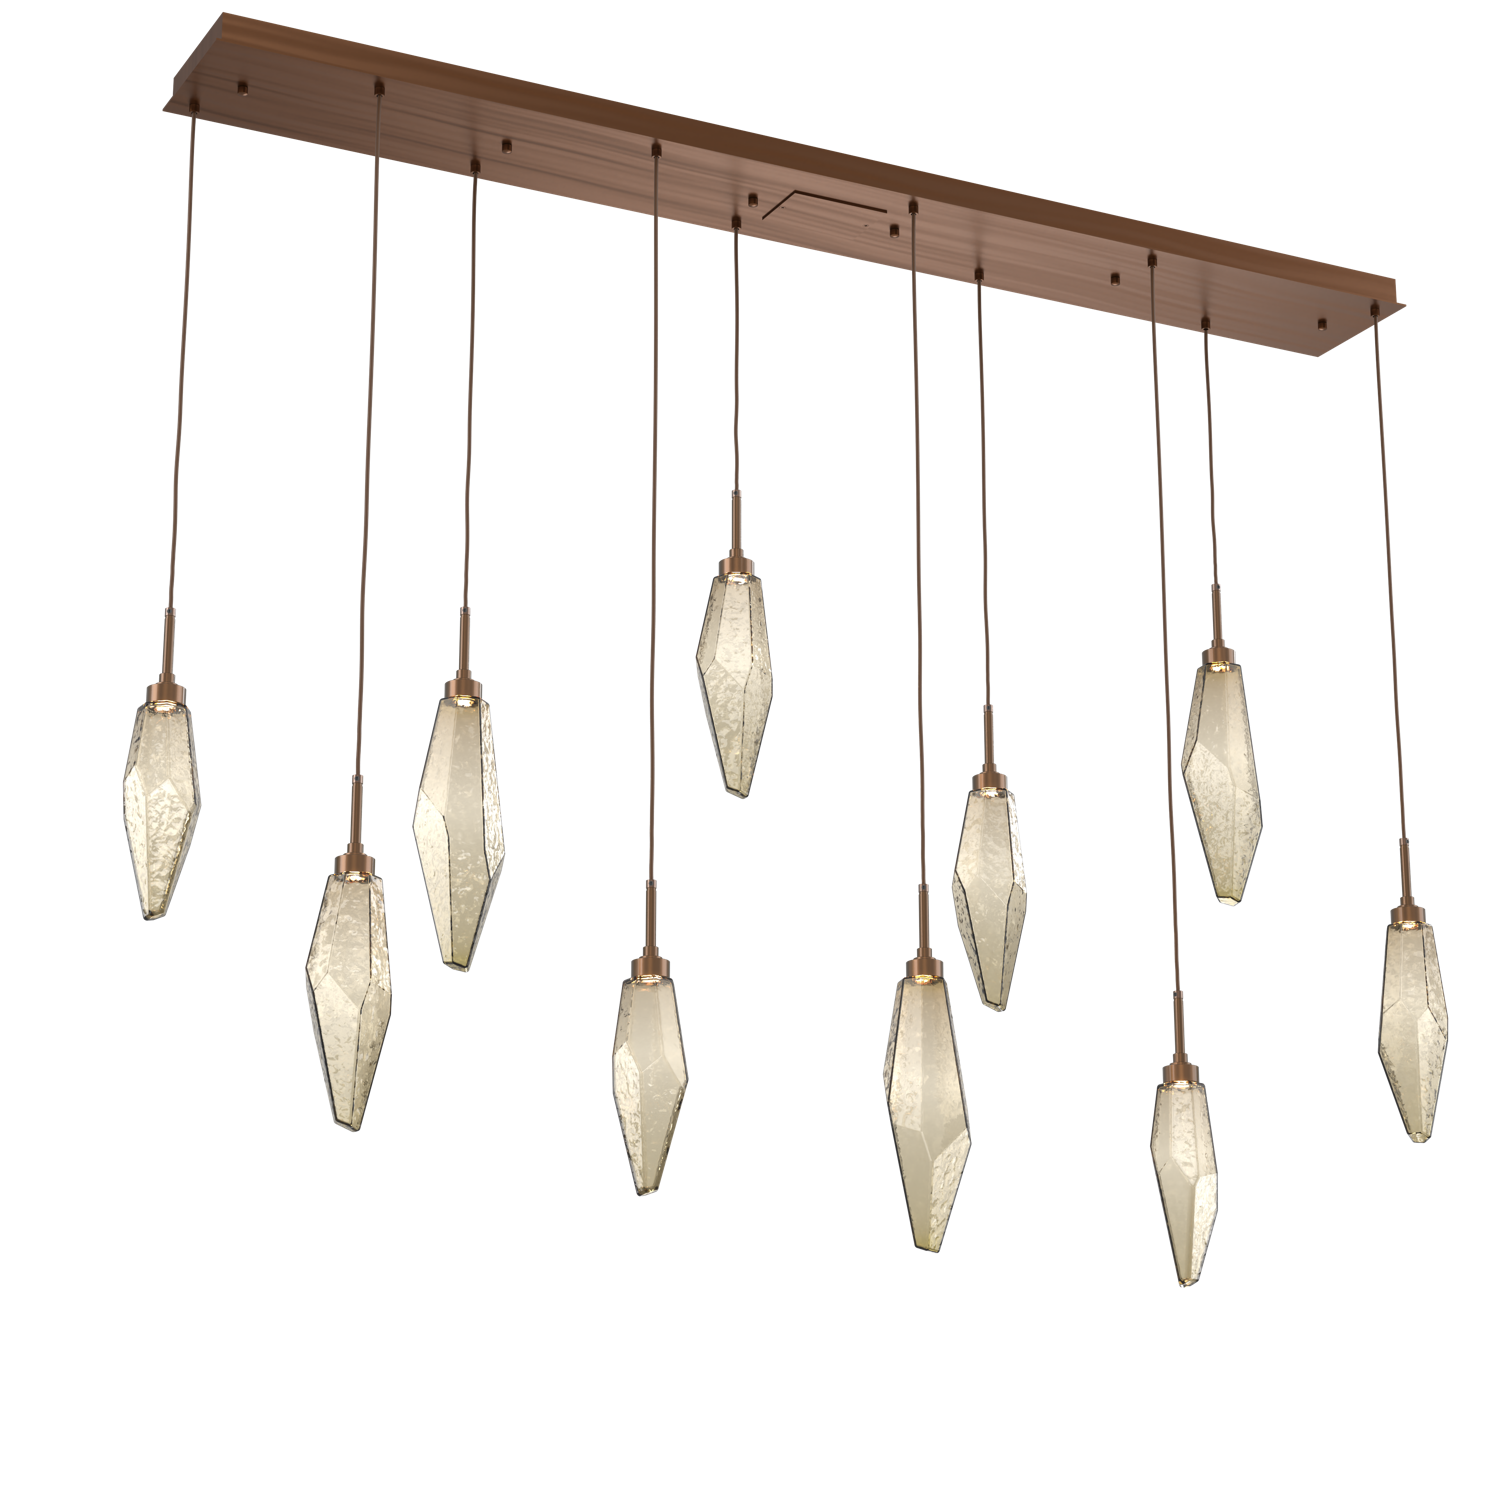 PLB0050-10-RB-CB-Hammerton-Studio-Rock-Crystal-10-light-linear-pendant-chandelier-with-oil-rubbed-bronze-finish-and-chilled-bronze-blown-glass-shades-and-LED-lamping